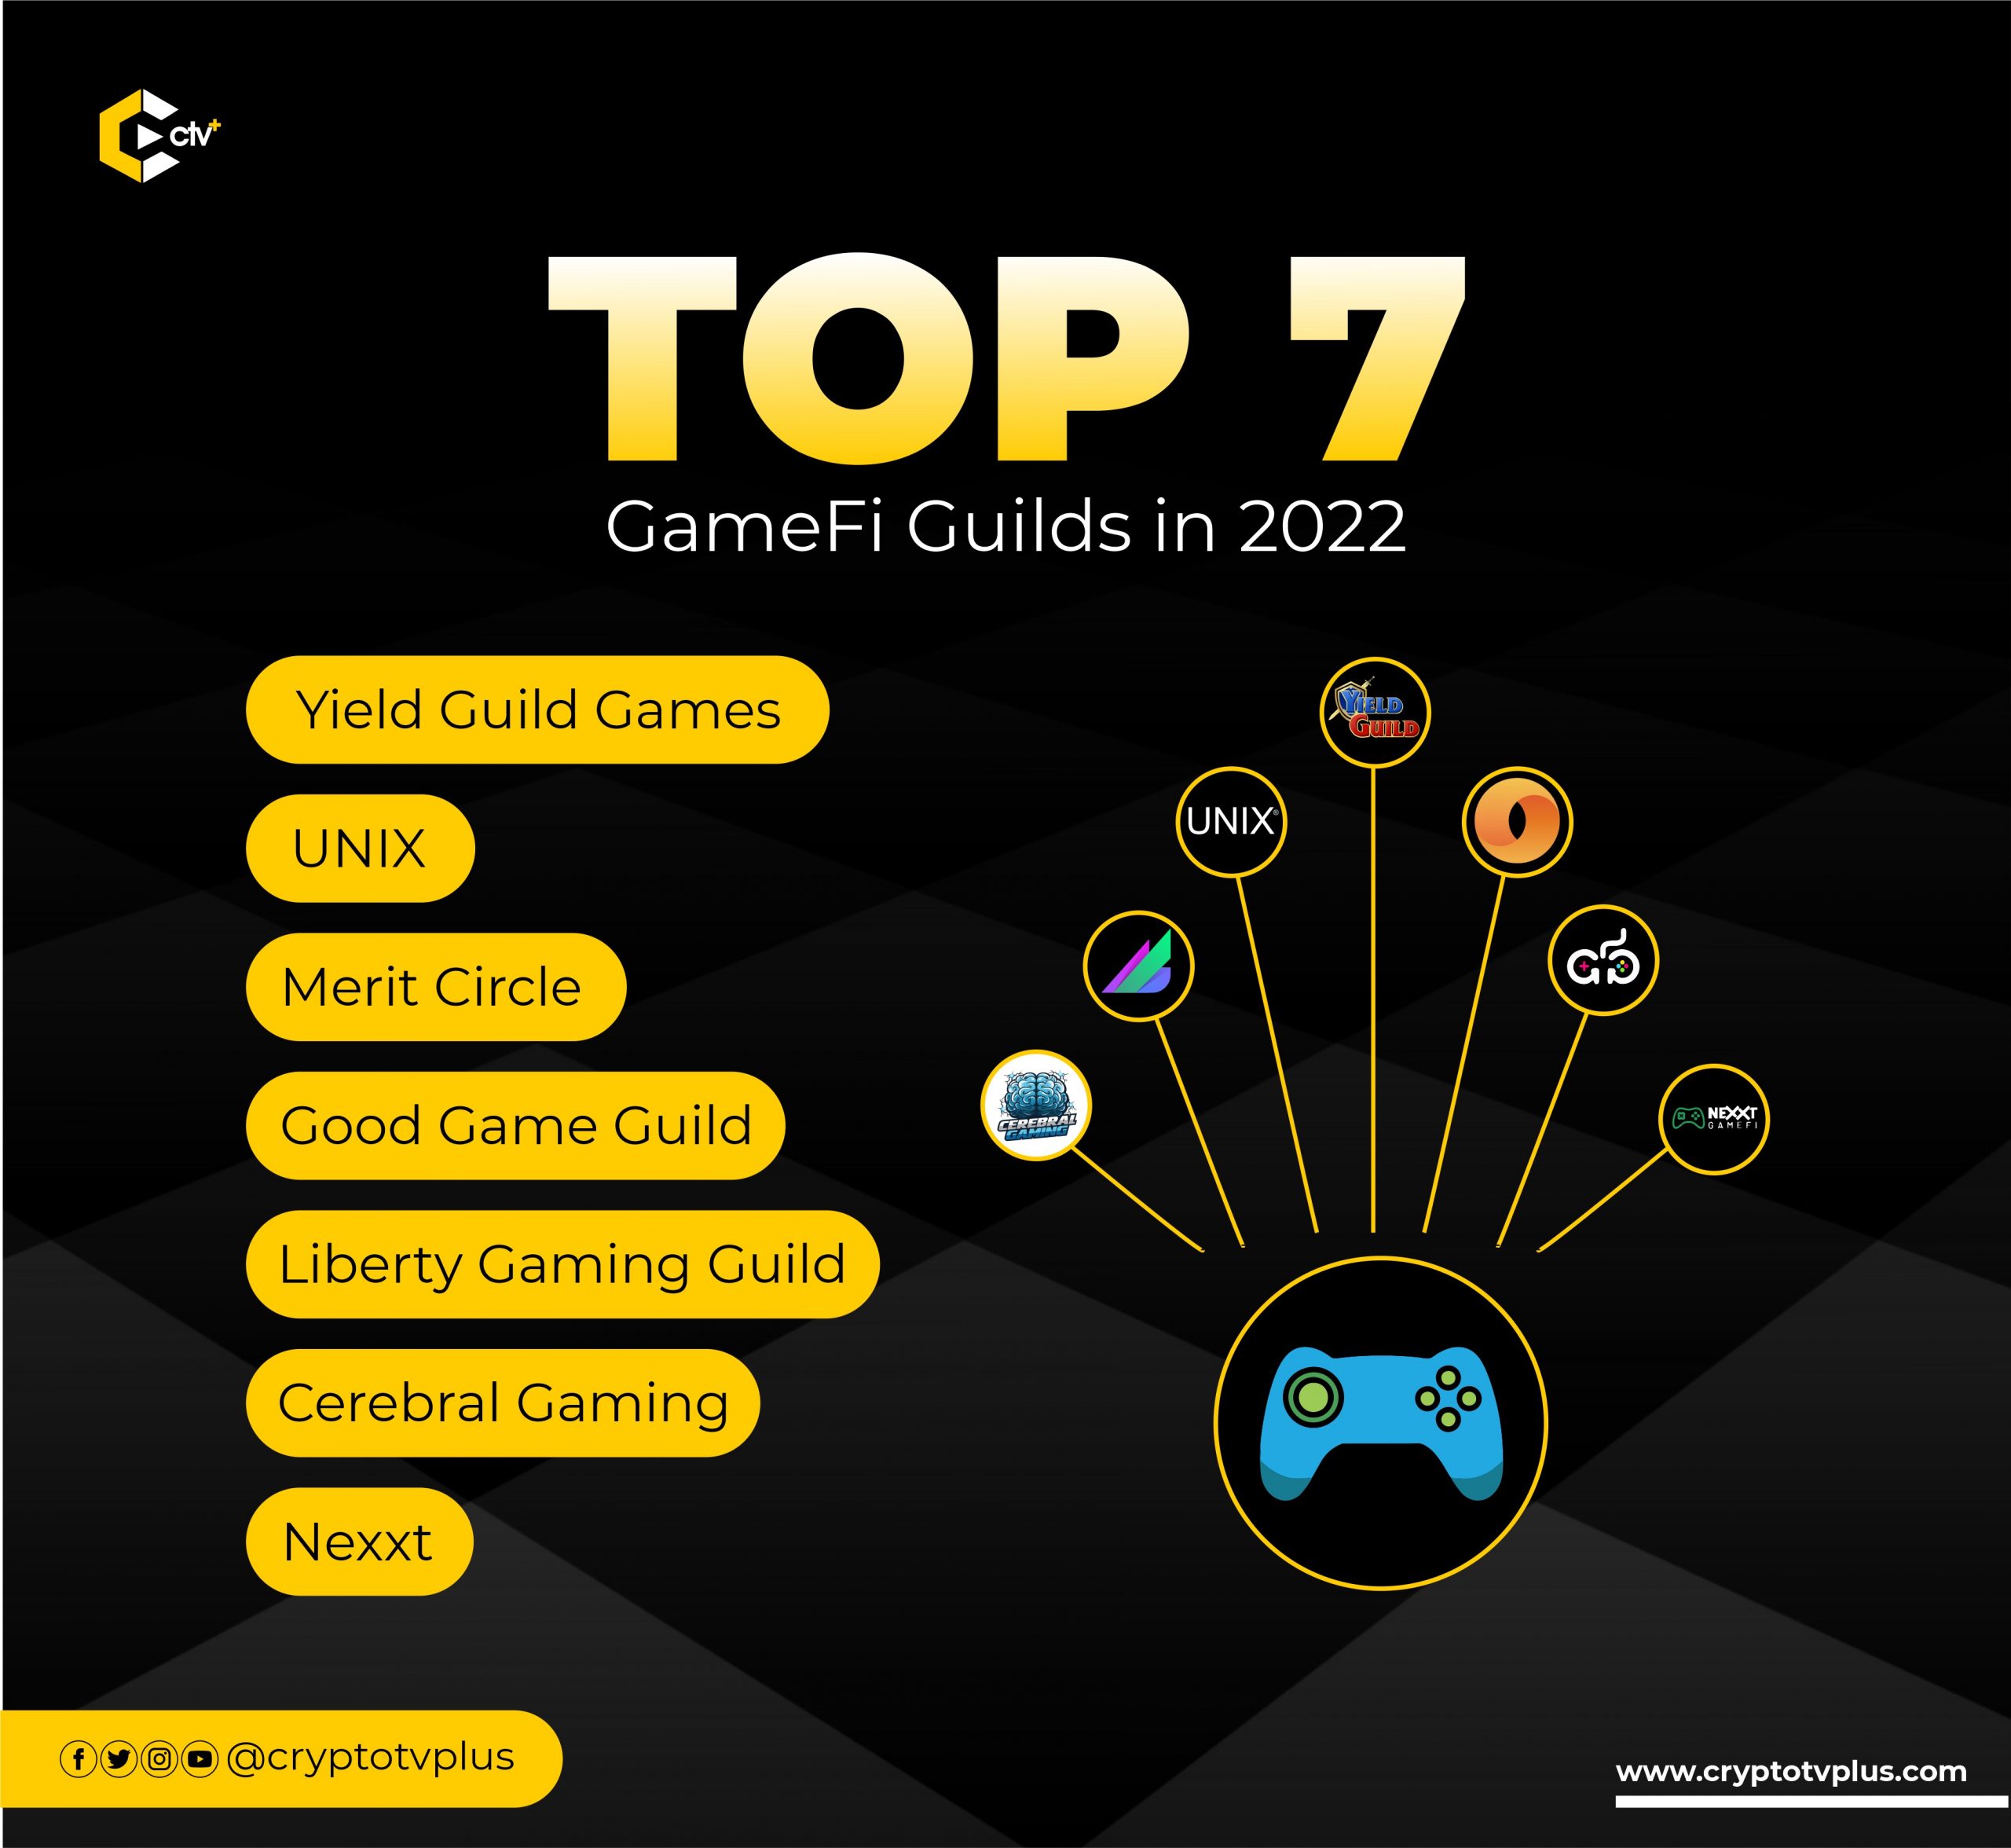 Top GameFi Guilds In 2022 | CryptoTvplus: NFT, Bitcoin, Ethereum Altcoin, Cryptocurrency & Blockchain News, Interviews, Research, Shows